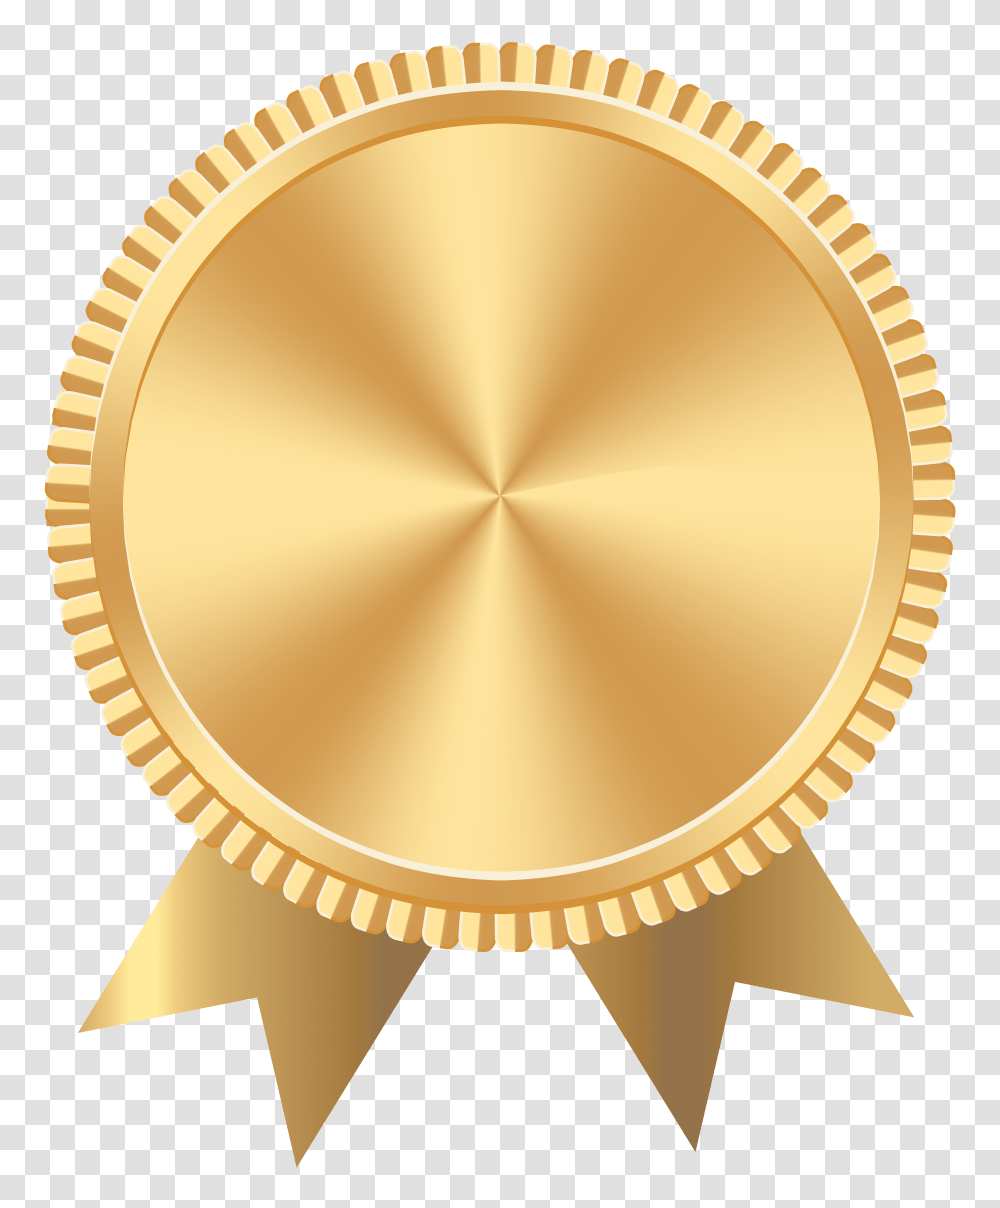 Download Free Gold Seal Badge Clip Art Image Andre Williams Mr Rhythm Bacon Fat Transparent Png